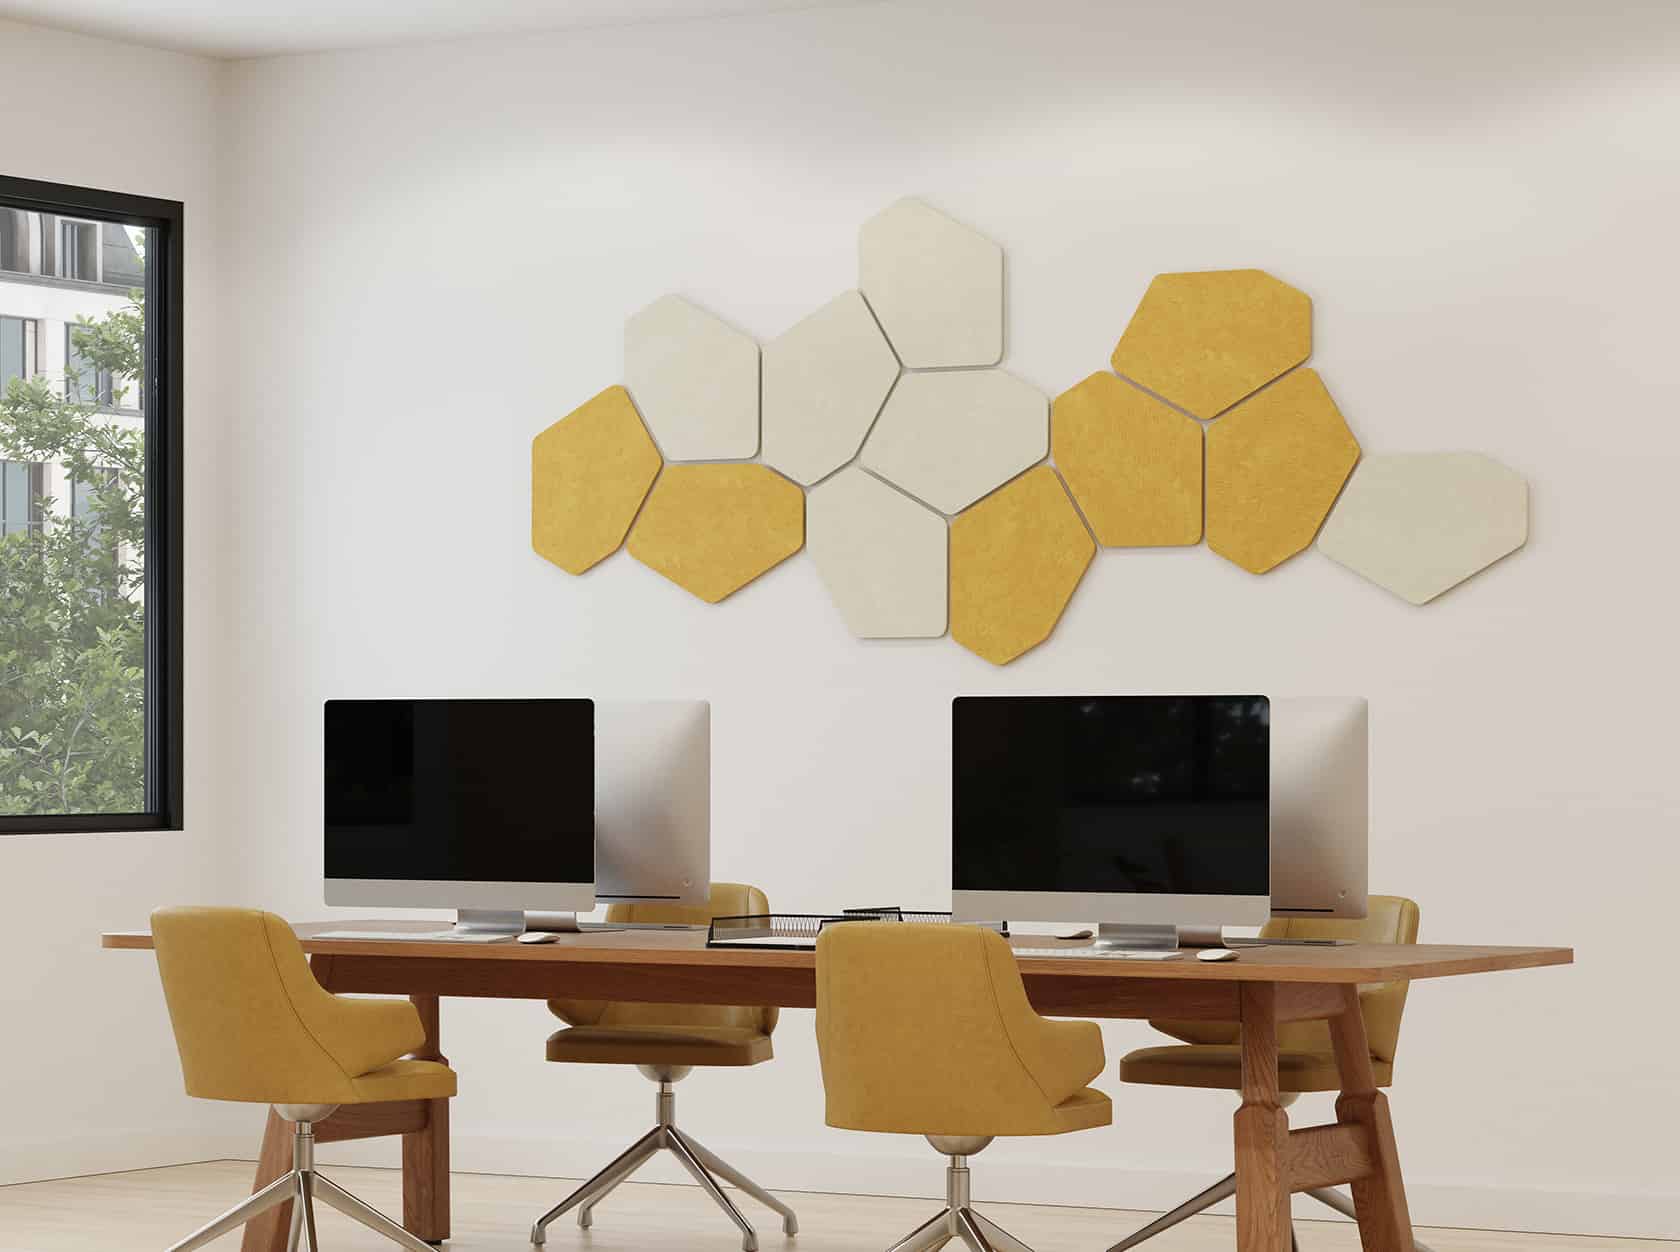 HUSH open space office acoustic wall panels